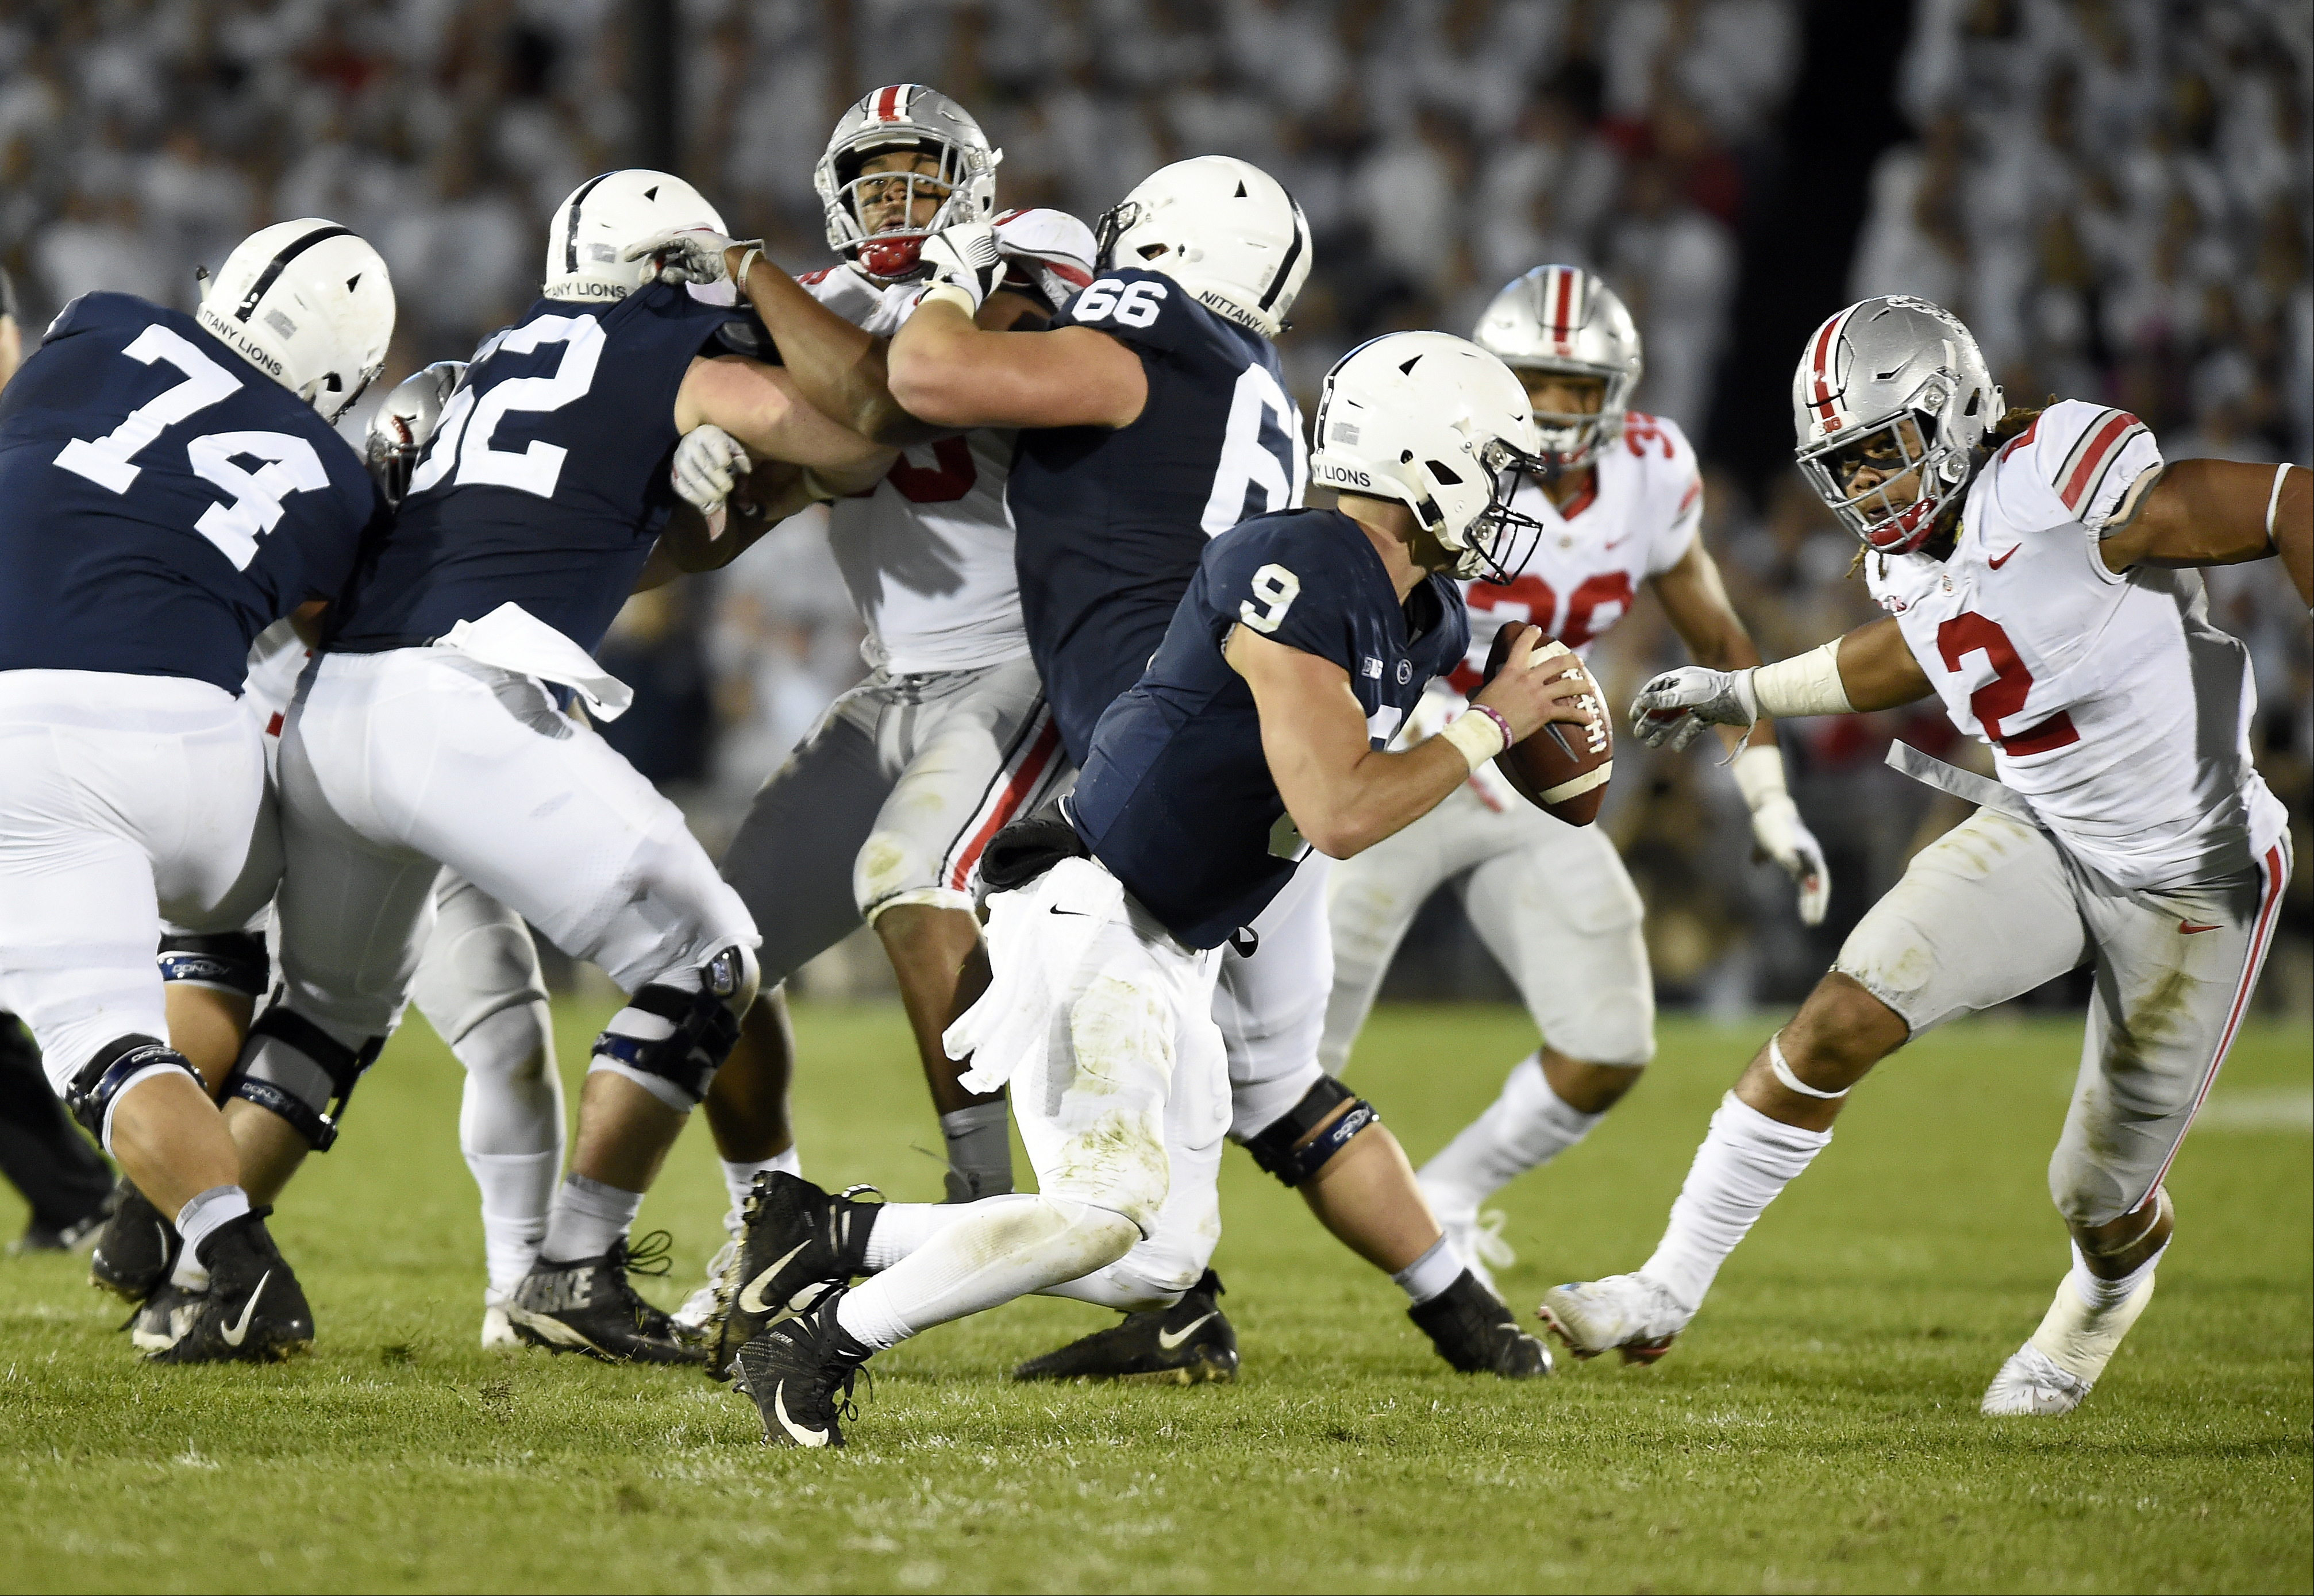 COLLEGE FOOTBALL: SEP 29 Ohio State at Penn State